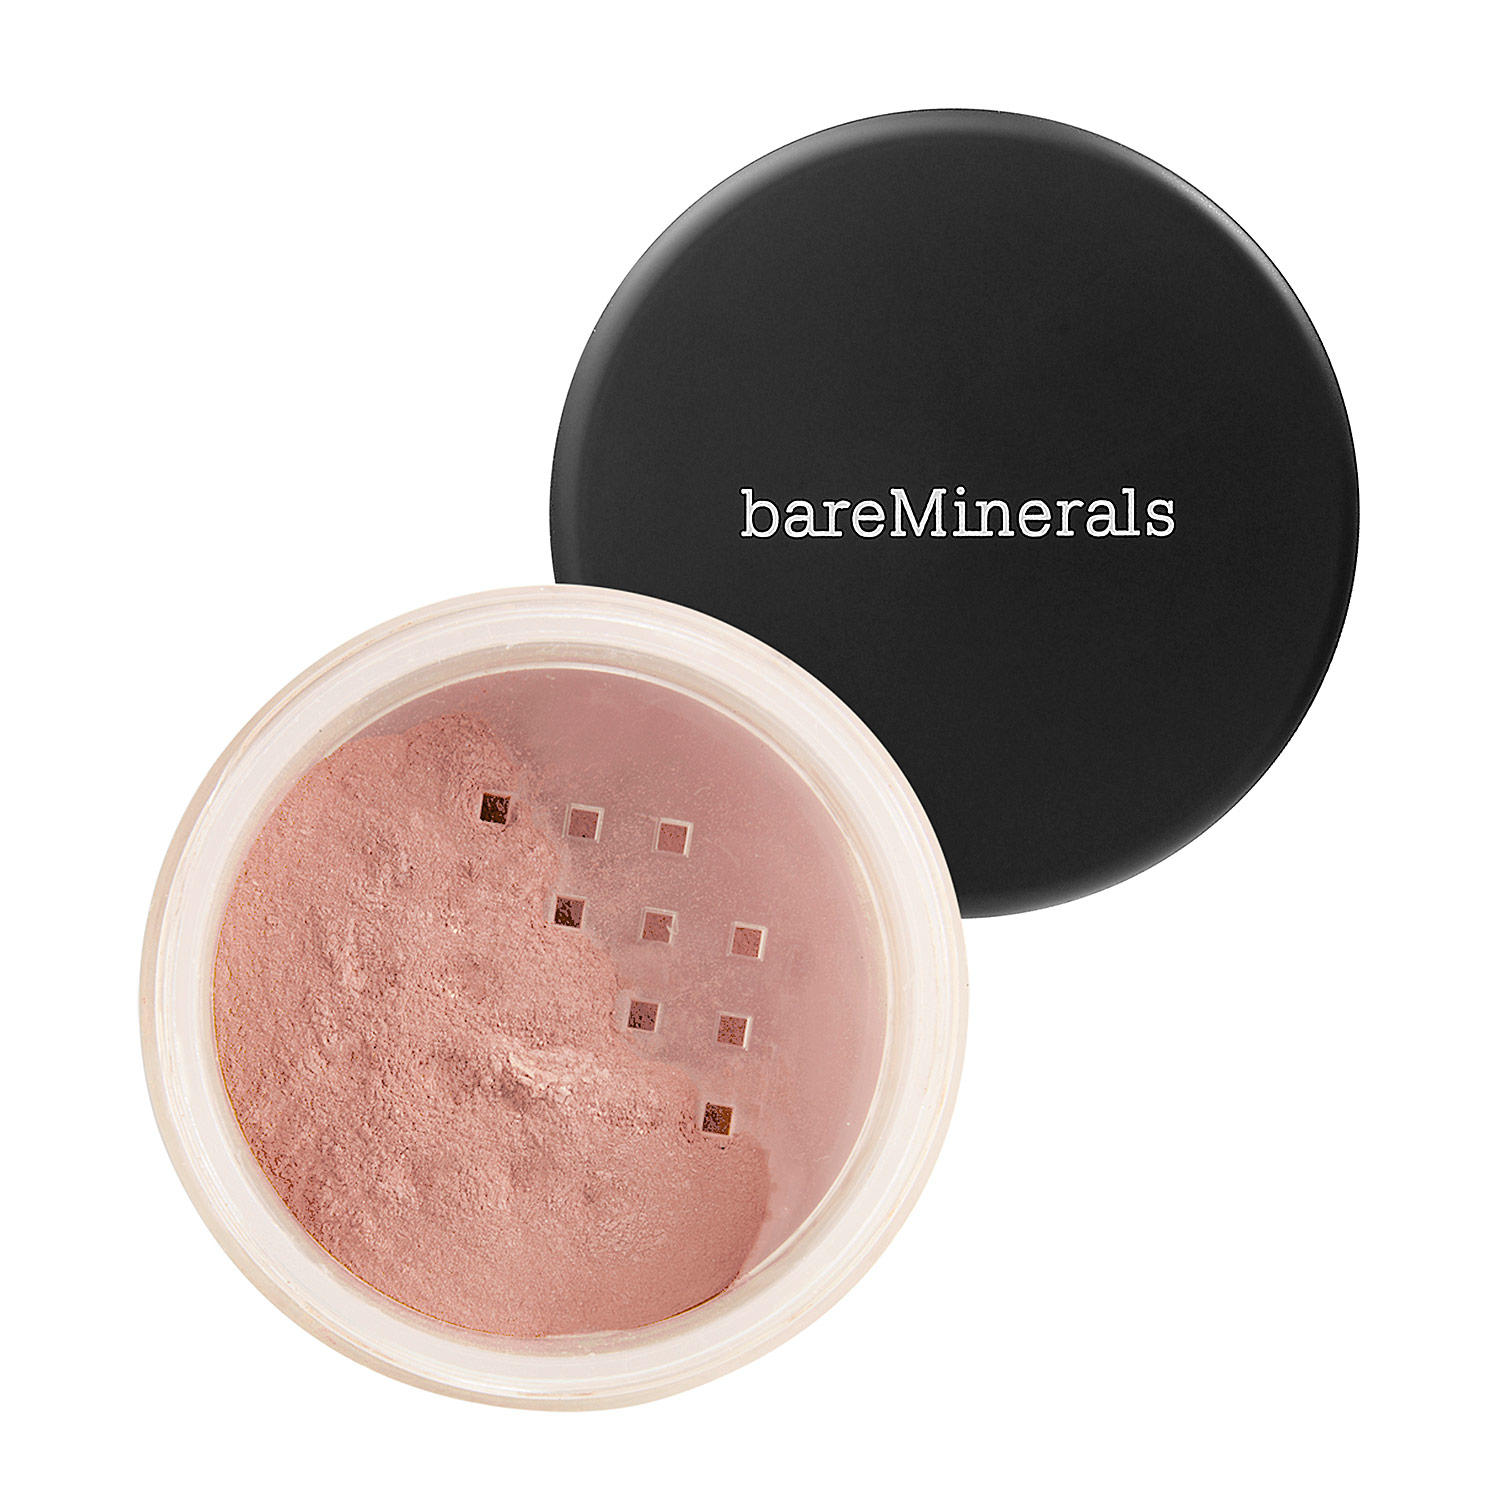 bareMinerals All-Over Face Color, $21.00